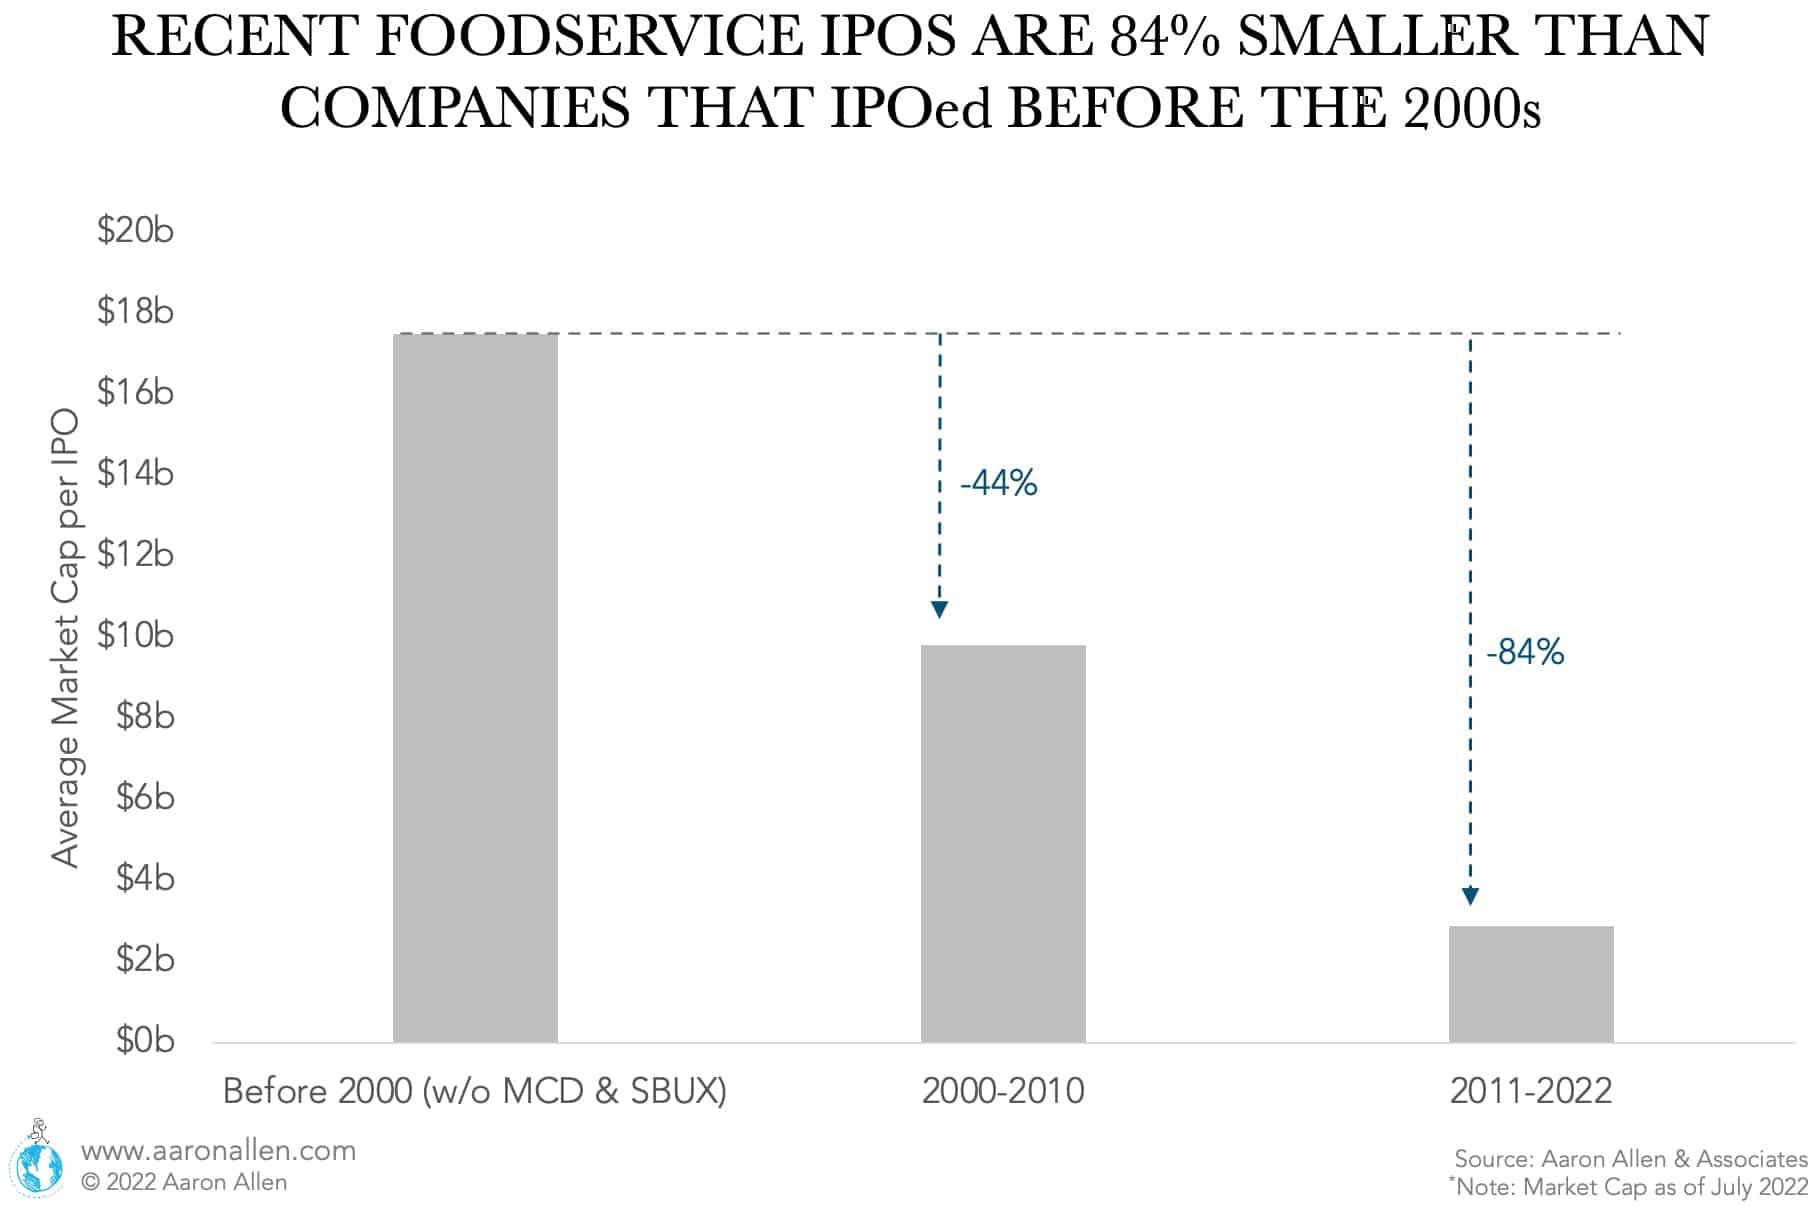 Average restaurant IPO size by decade and before the year 2000